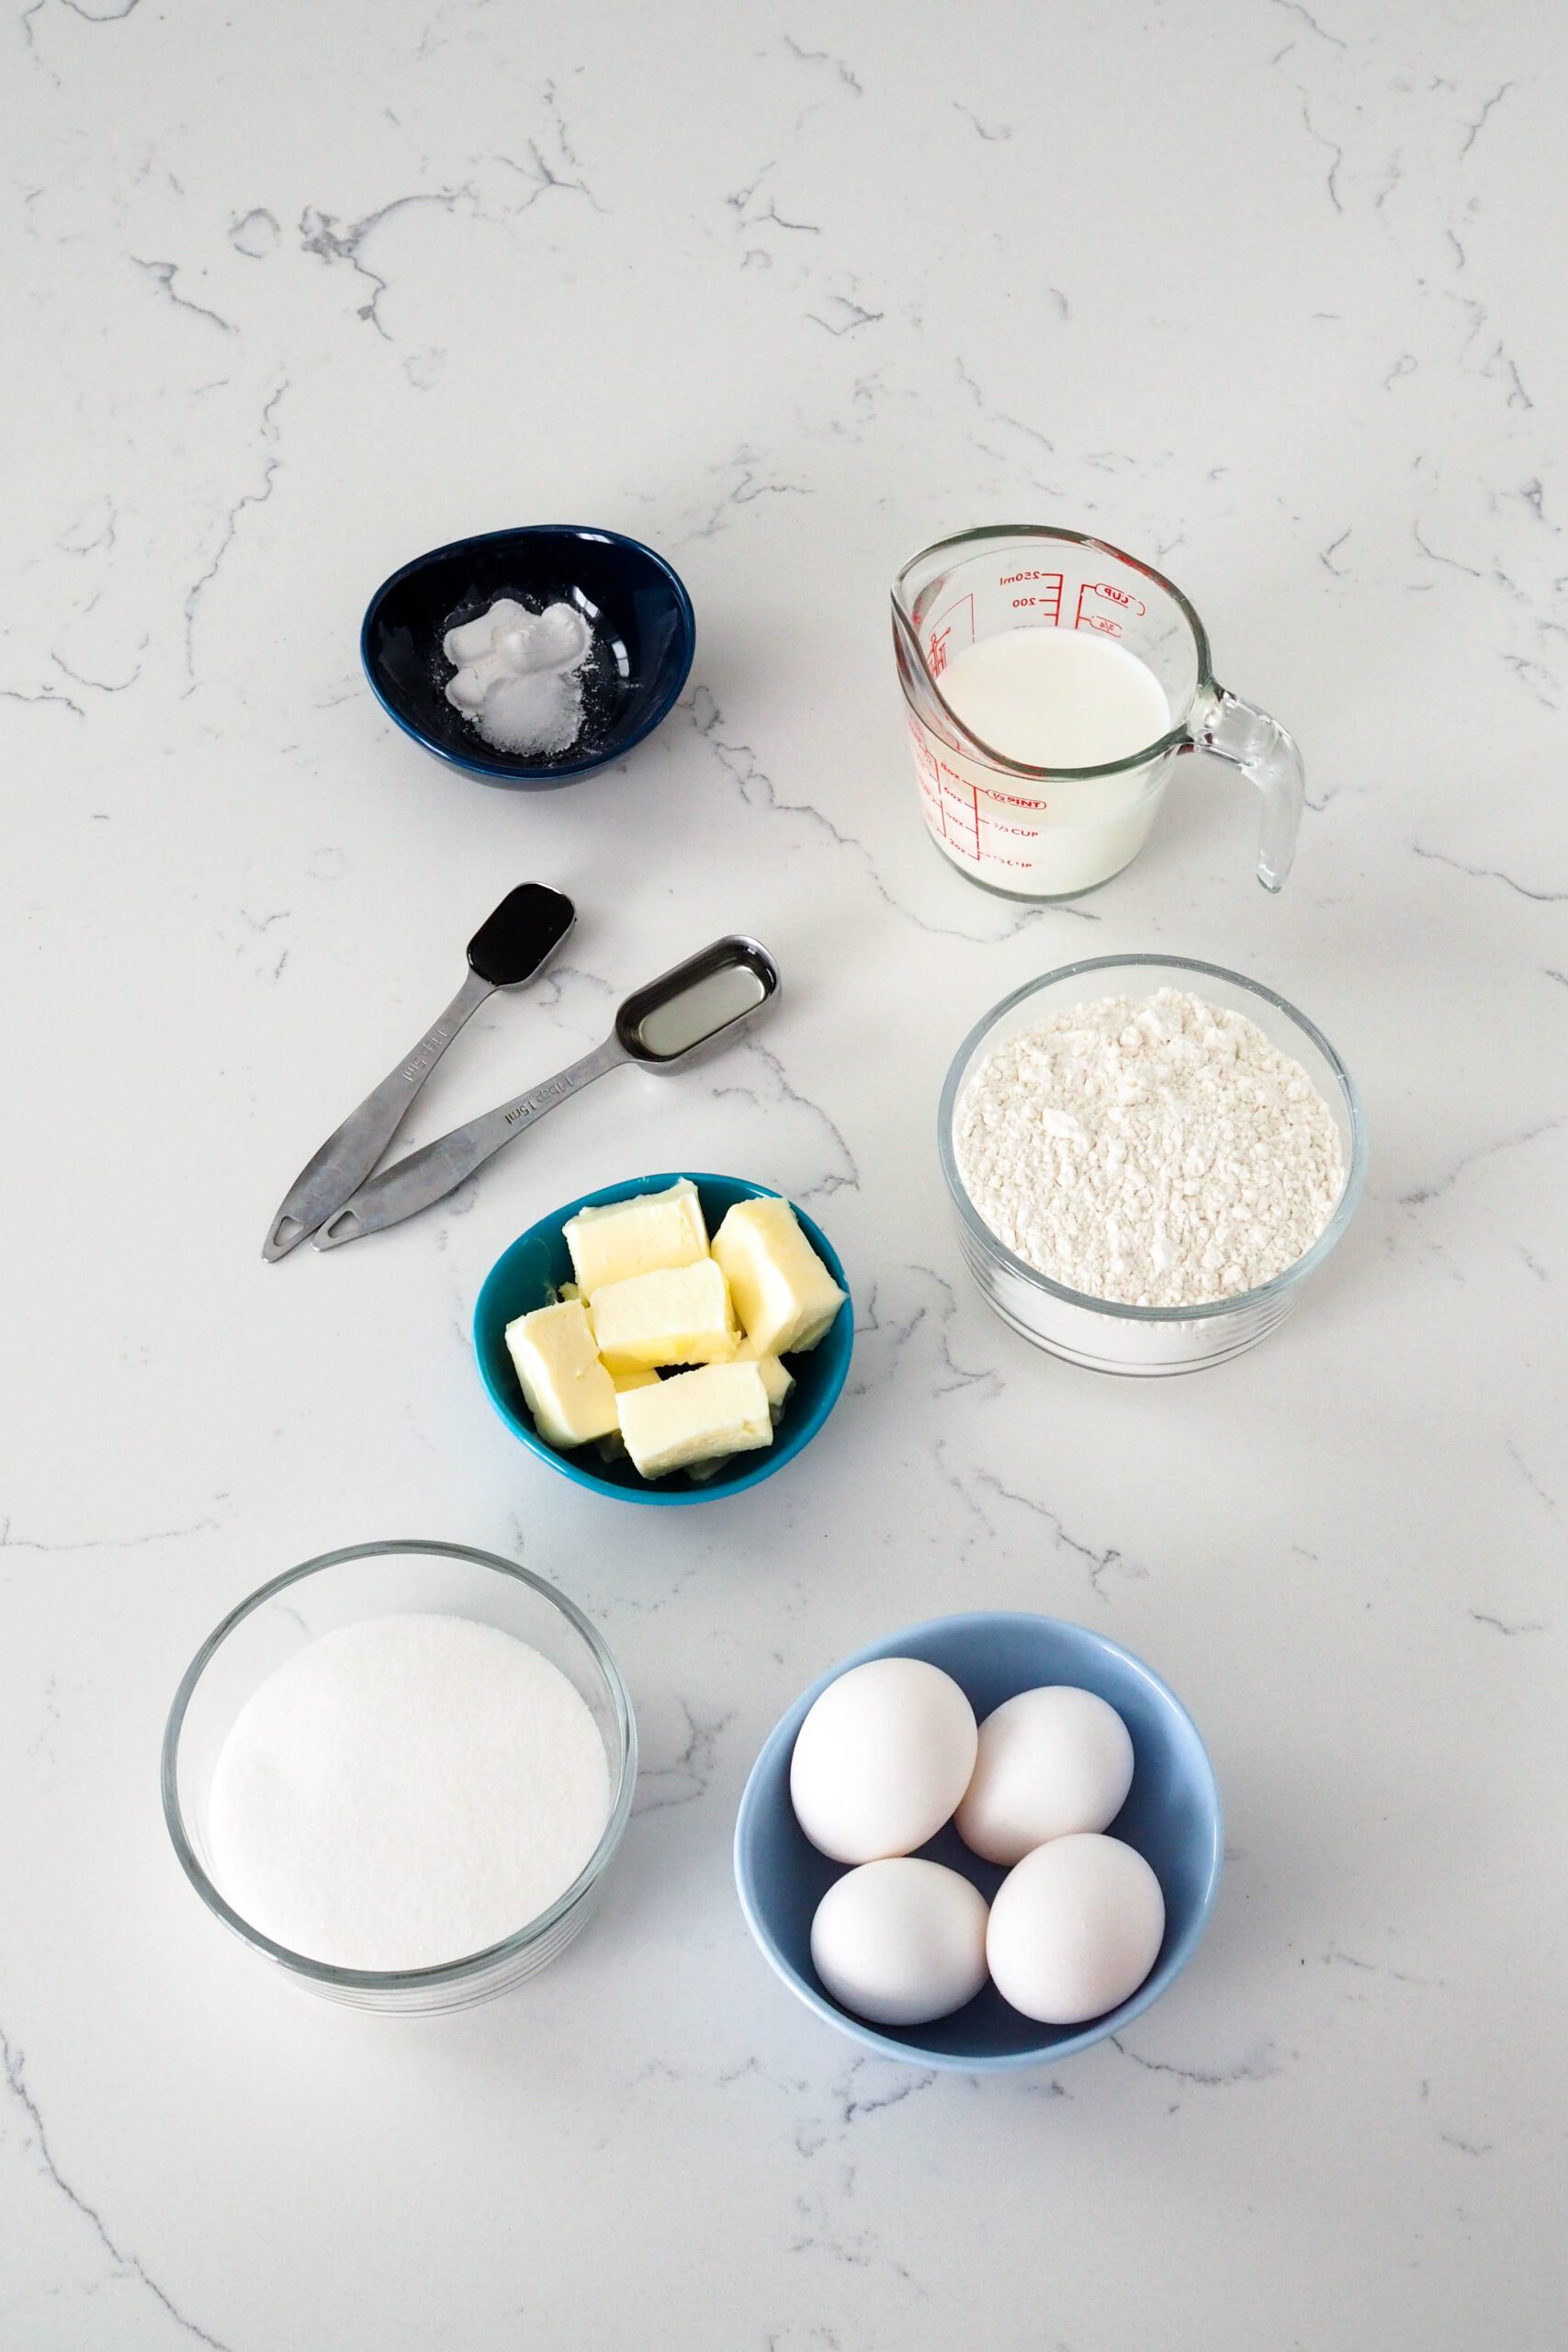 Ingredients needed to make the white cake laid out on a counter.